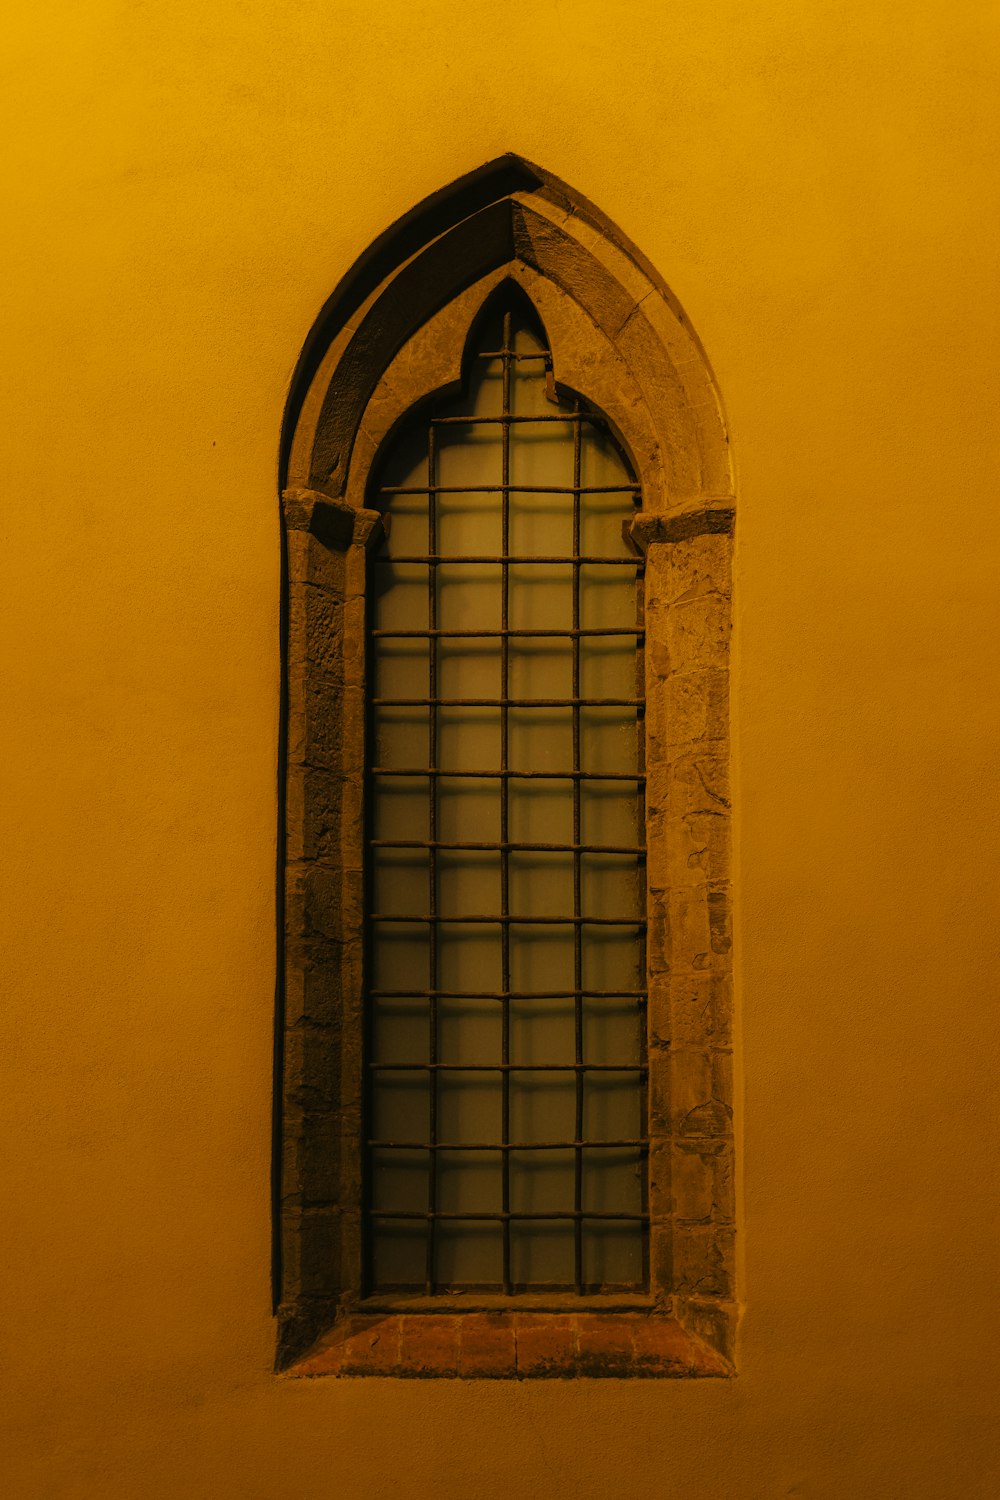 a window in a yellow wall with a window pane